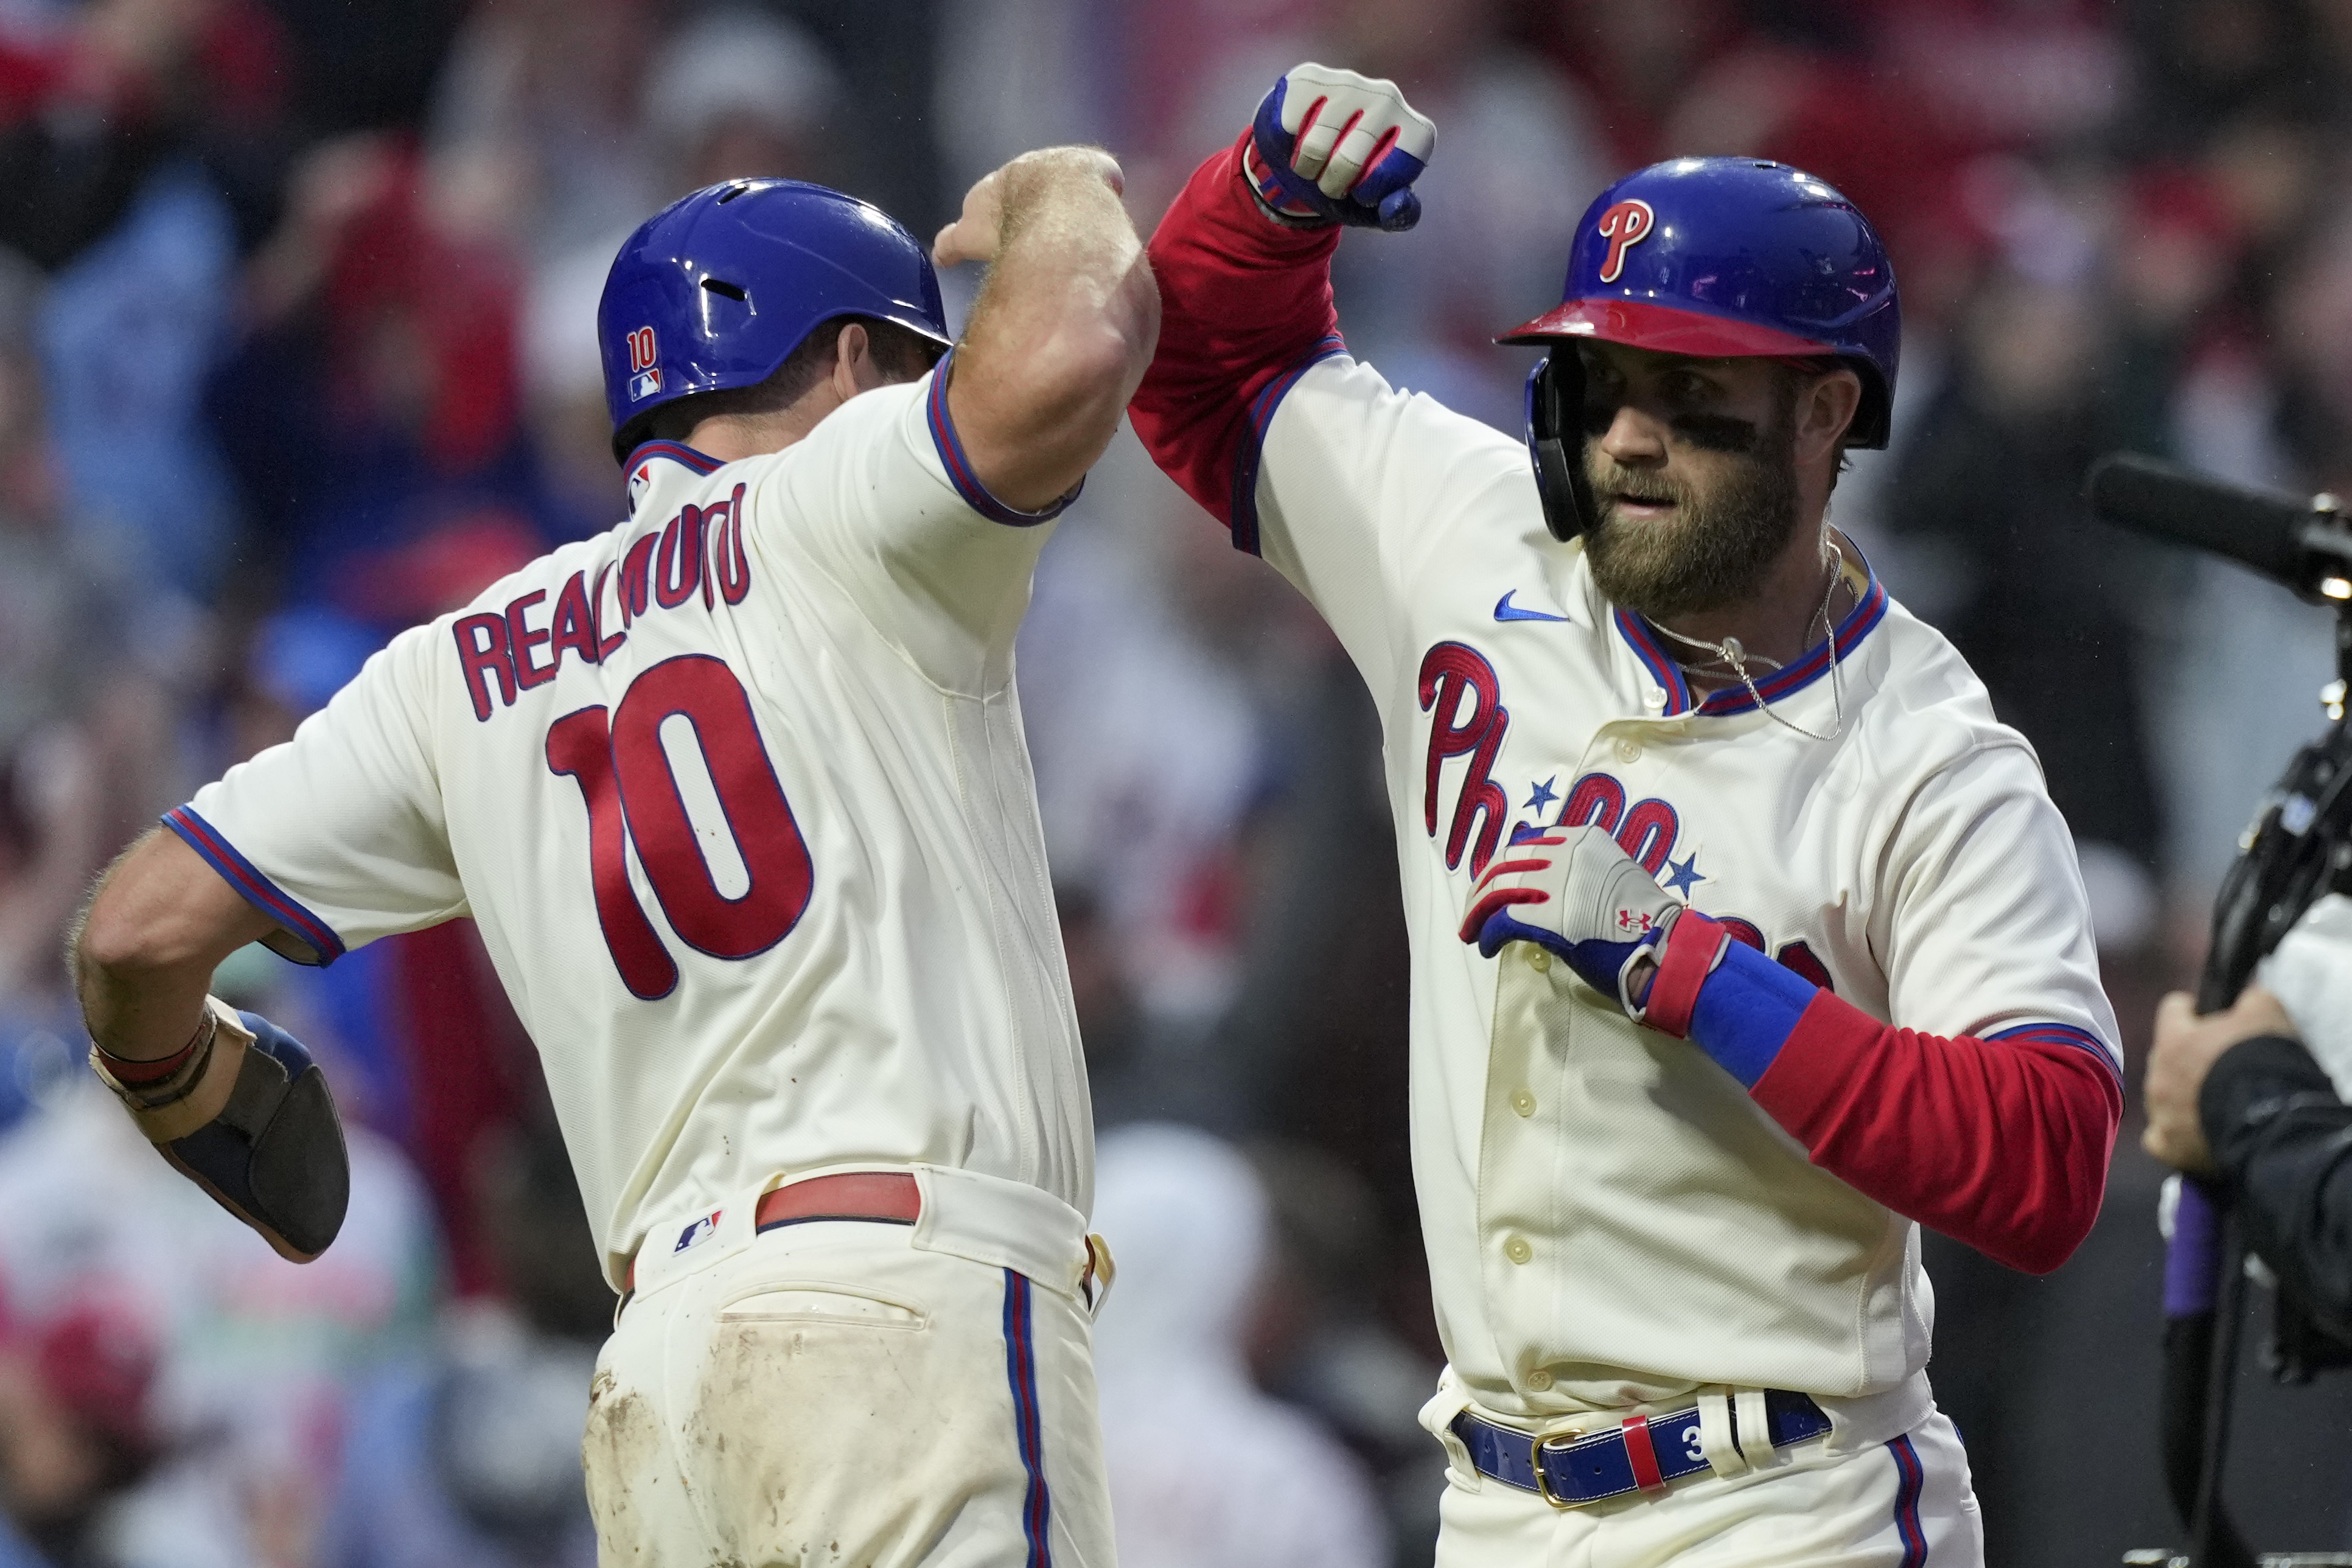 Bryce Harper belts 300th homer in Phillies' loss to Angels